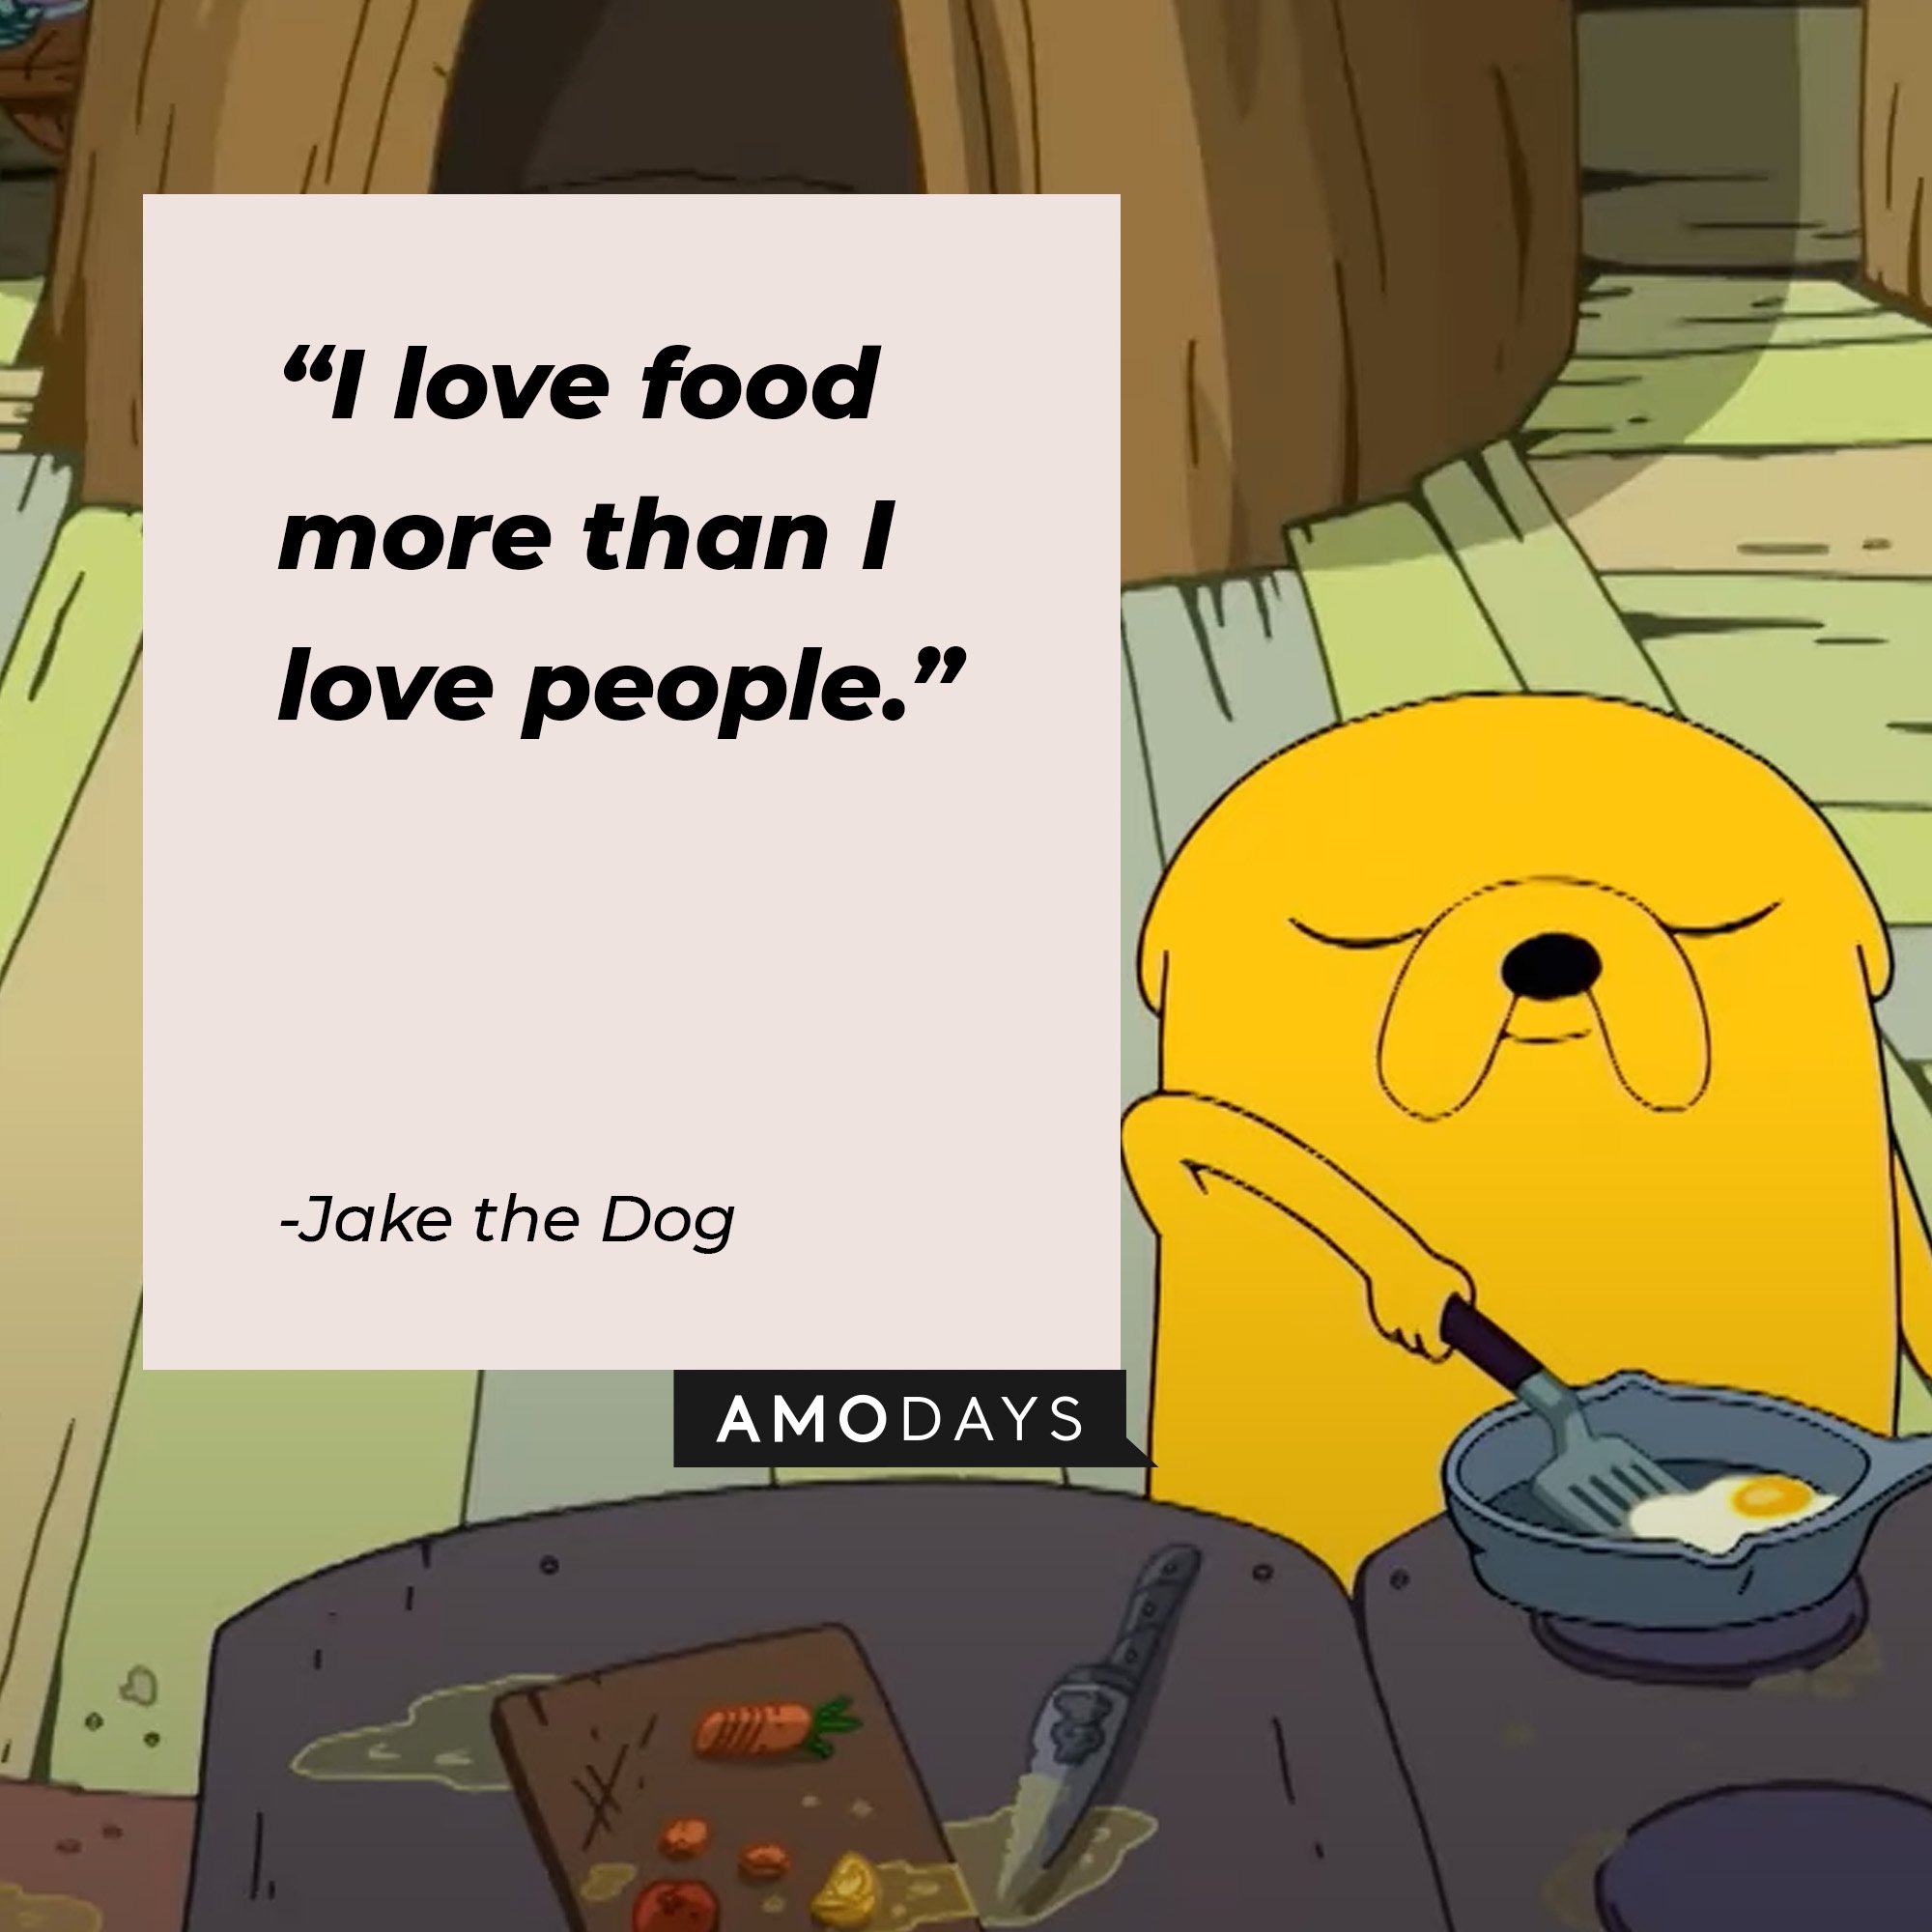  Jake the Dog’s quote: "I love food more than I love people." |  Image: AmoDays